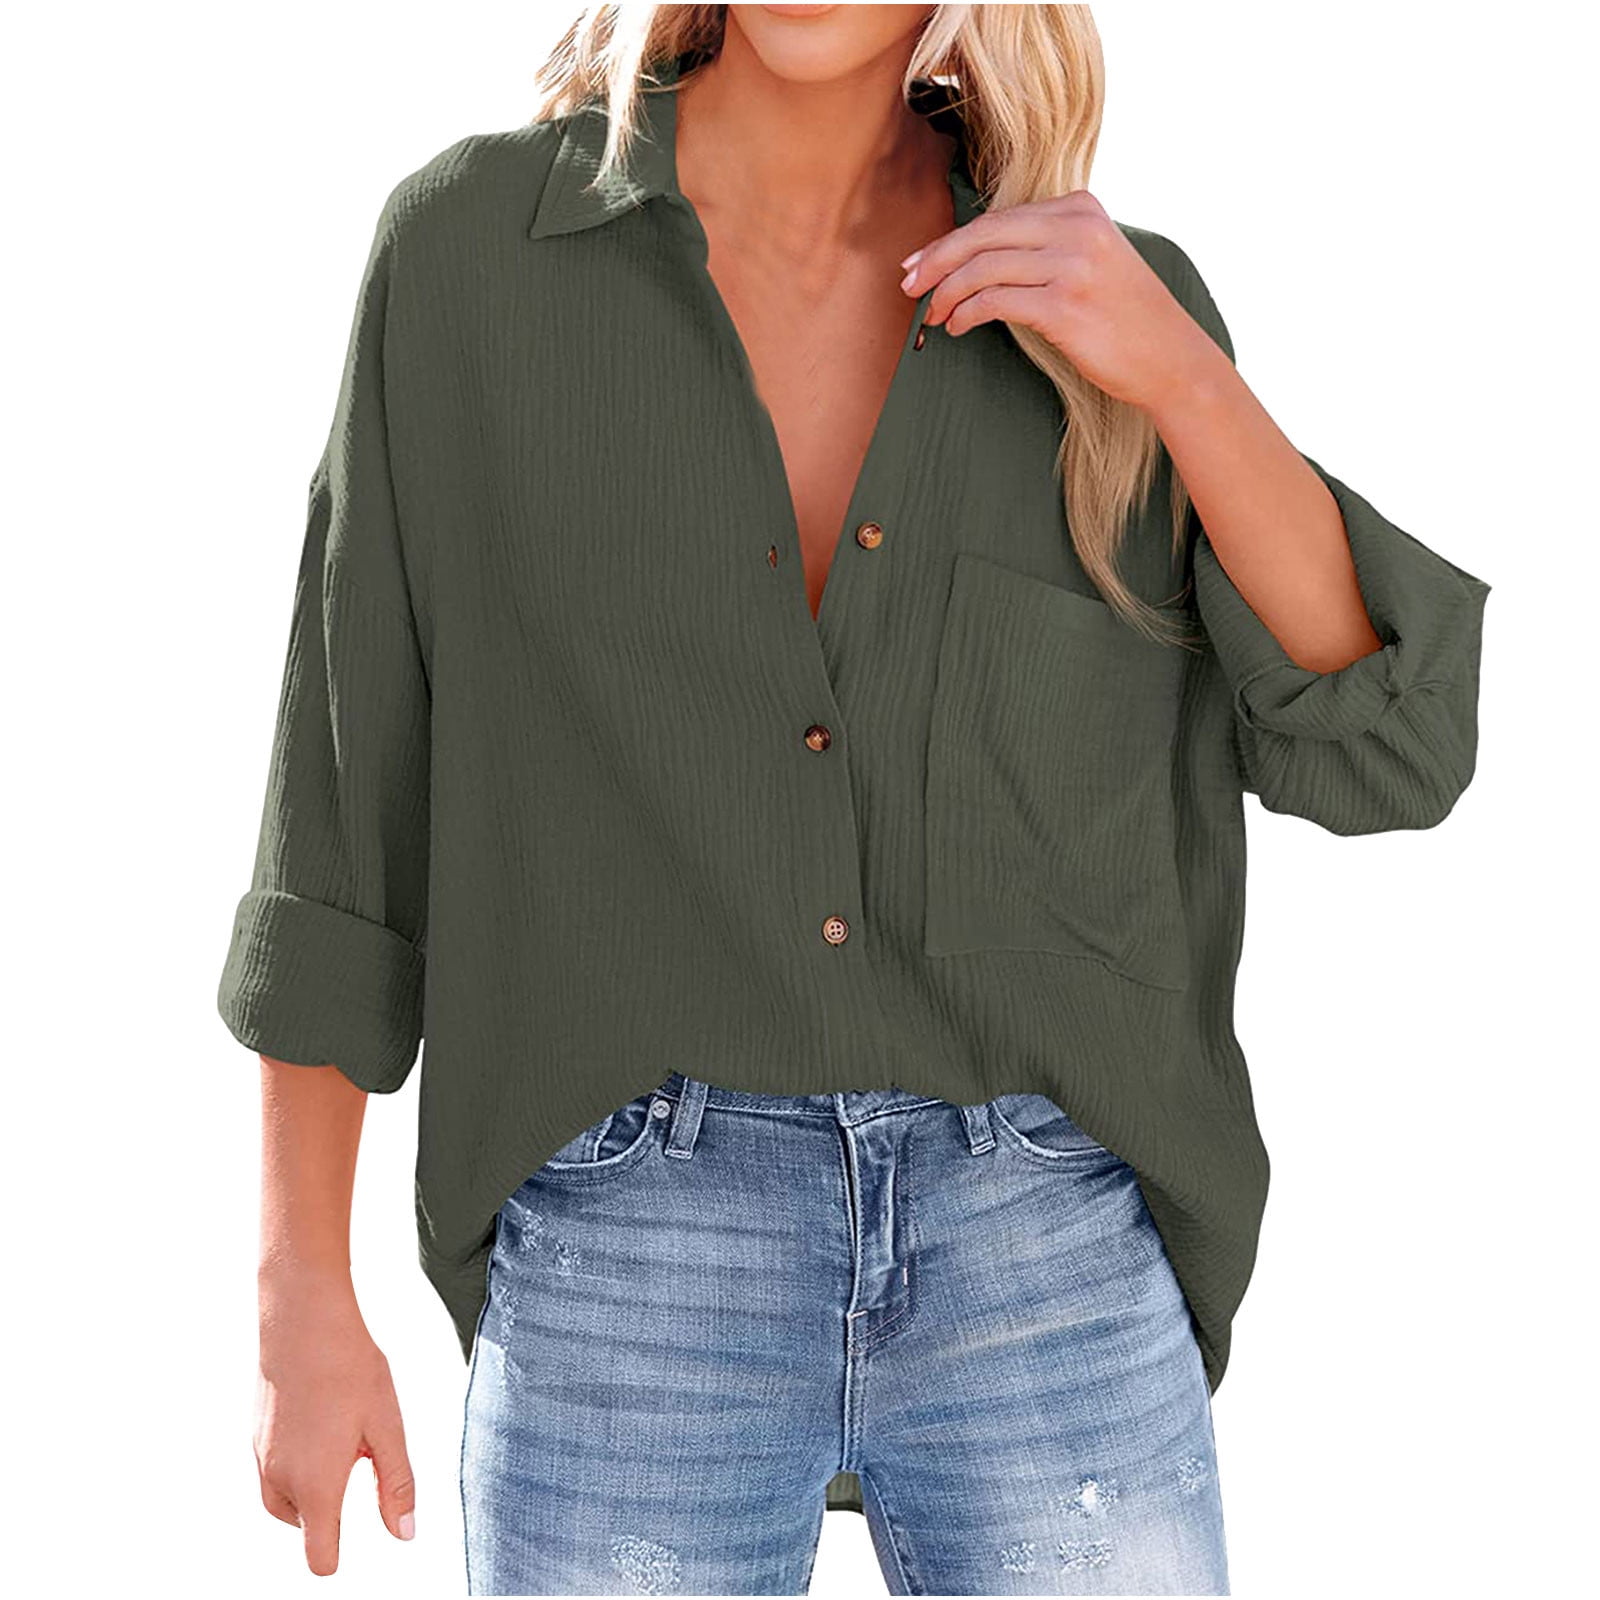 RYRJJ Womens Cotton Button Down Shirt Oversized Casual Long Sleeve Loose  Fit Collared Linen Work Blouse Tops with Pocket(Army Green,M)